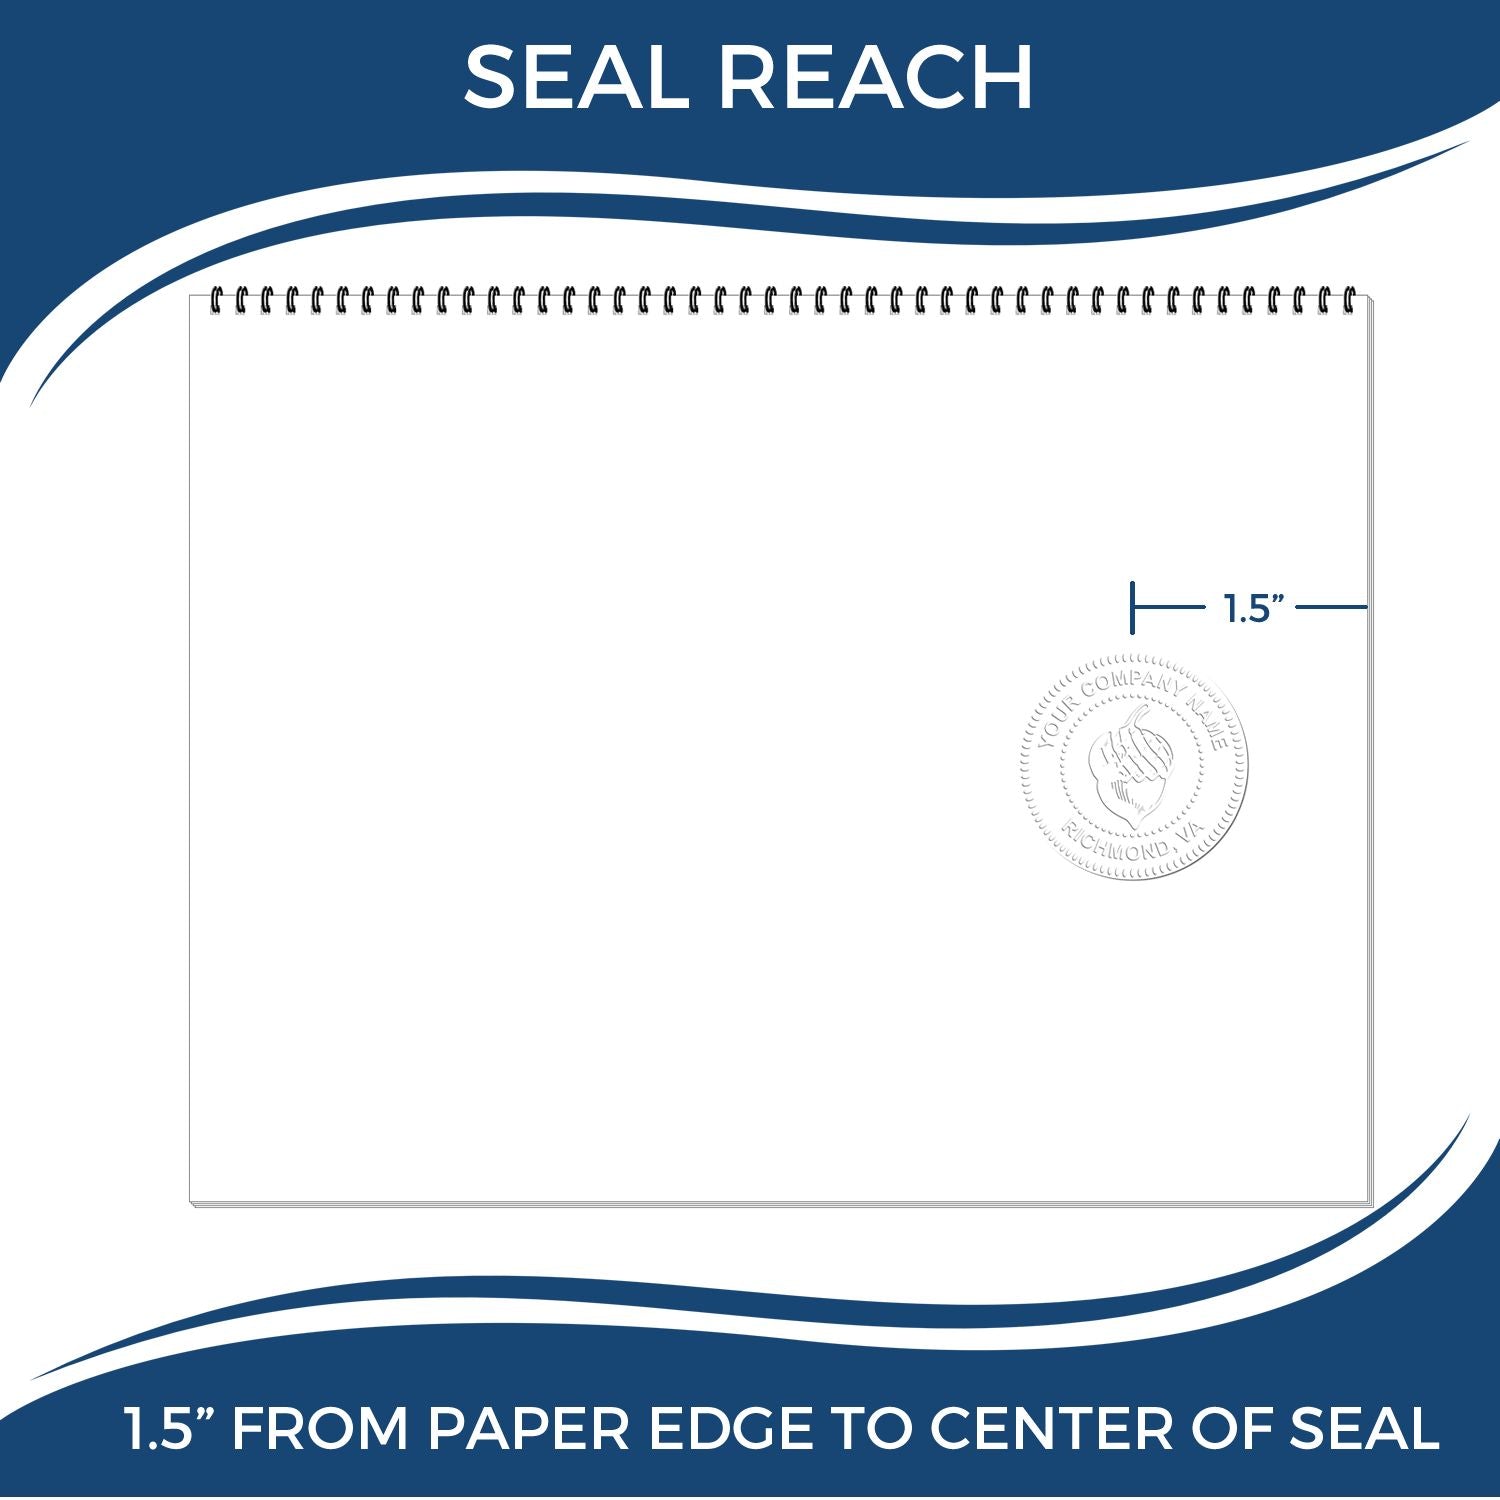 An infographic showing the seal reach which is represented by a ruler and a miniature seal image of the Handheld Colorado Professional Engineer Embosser